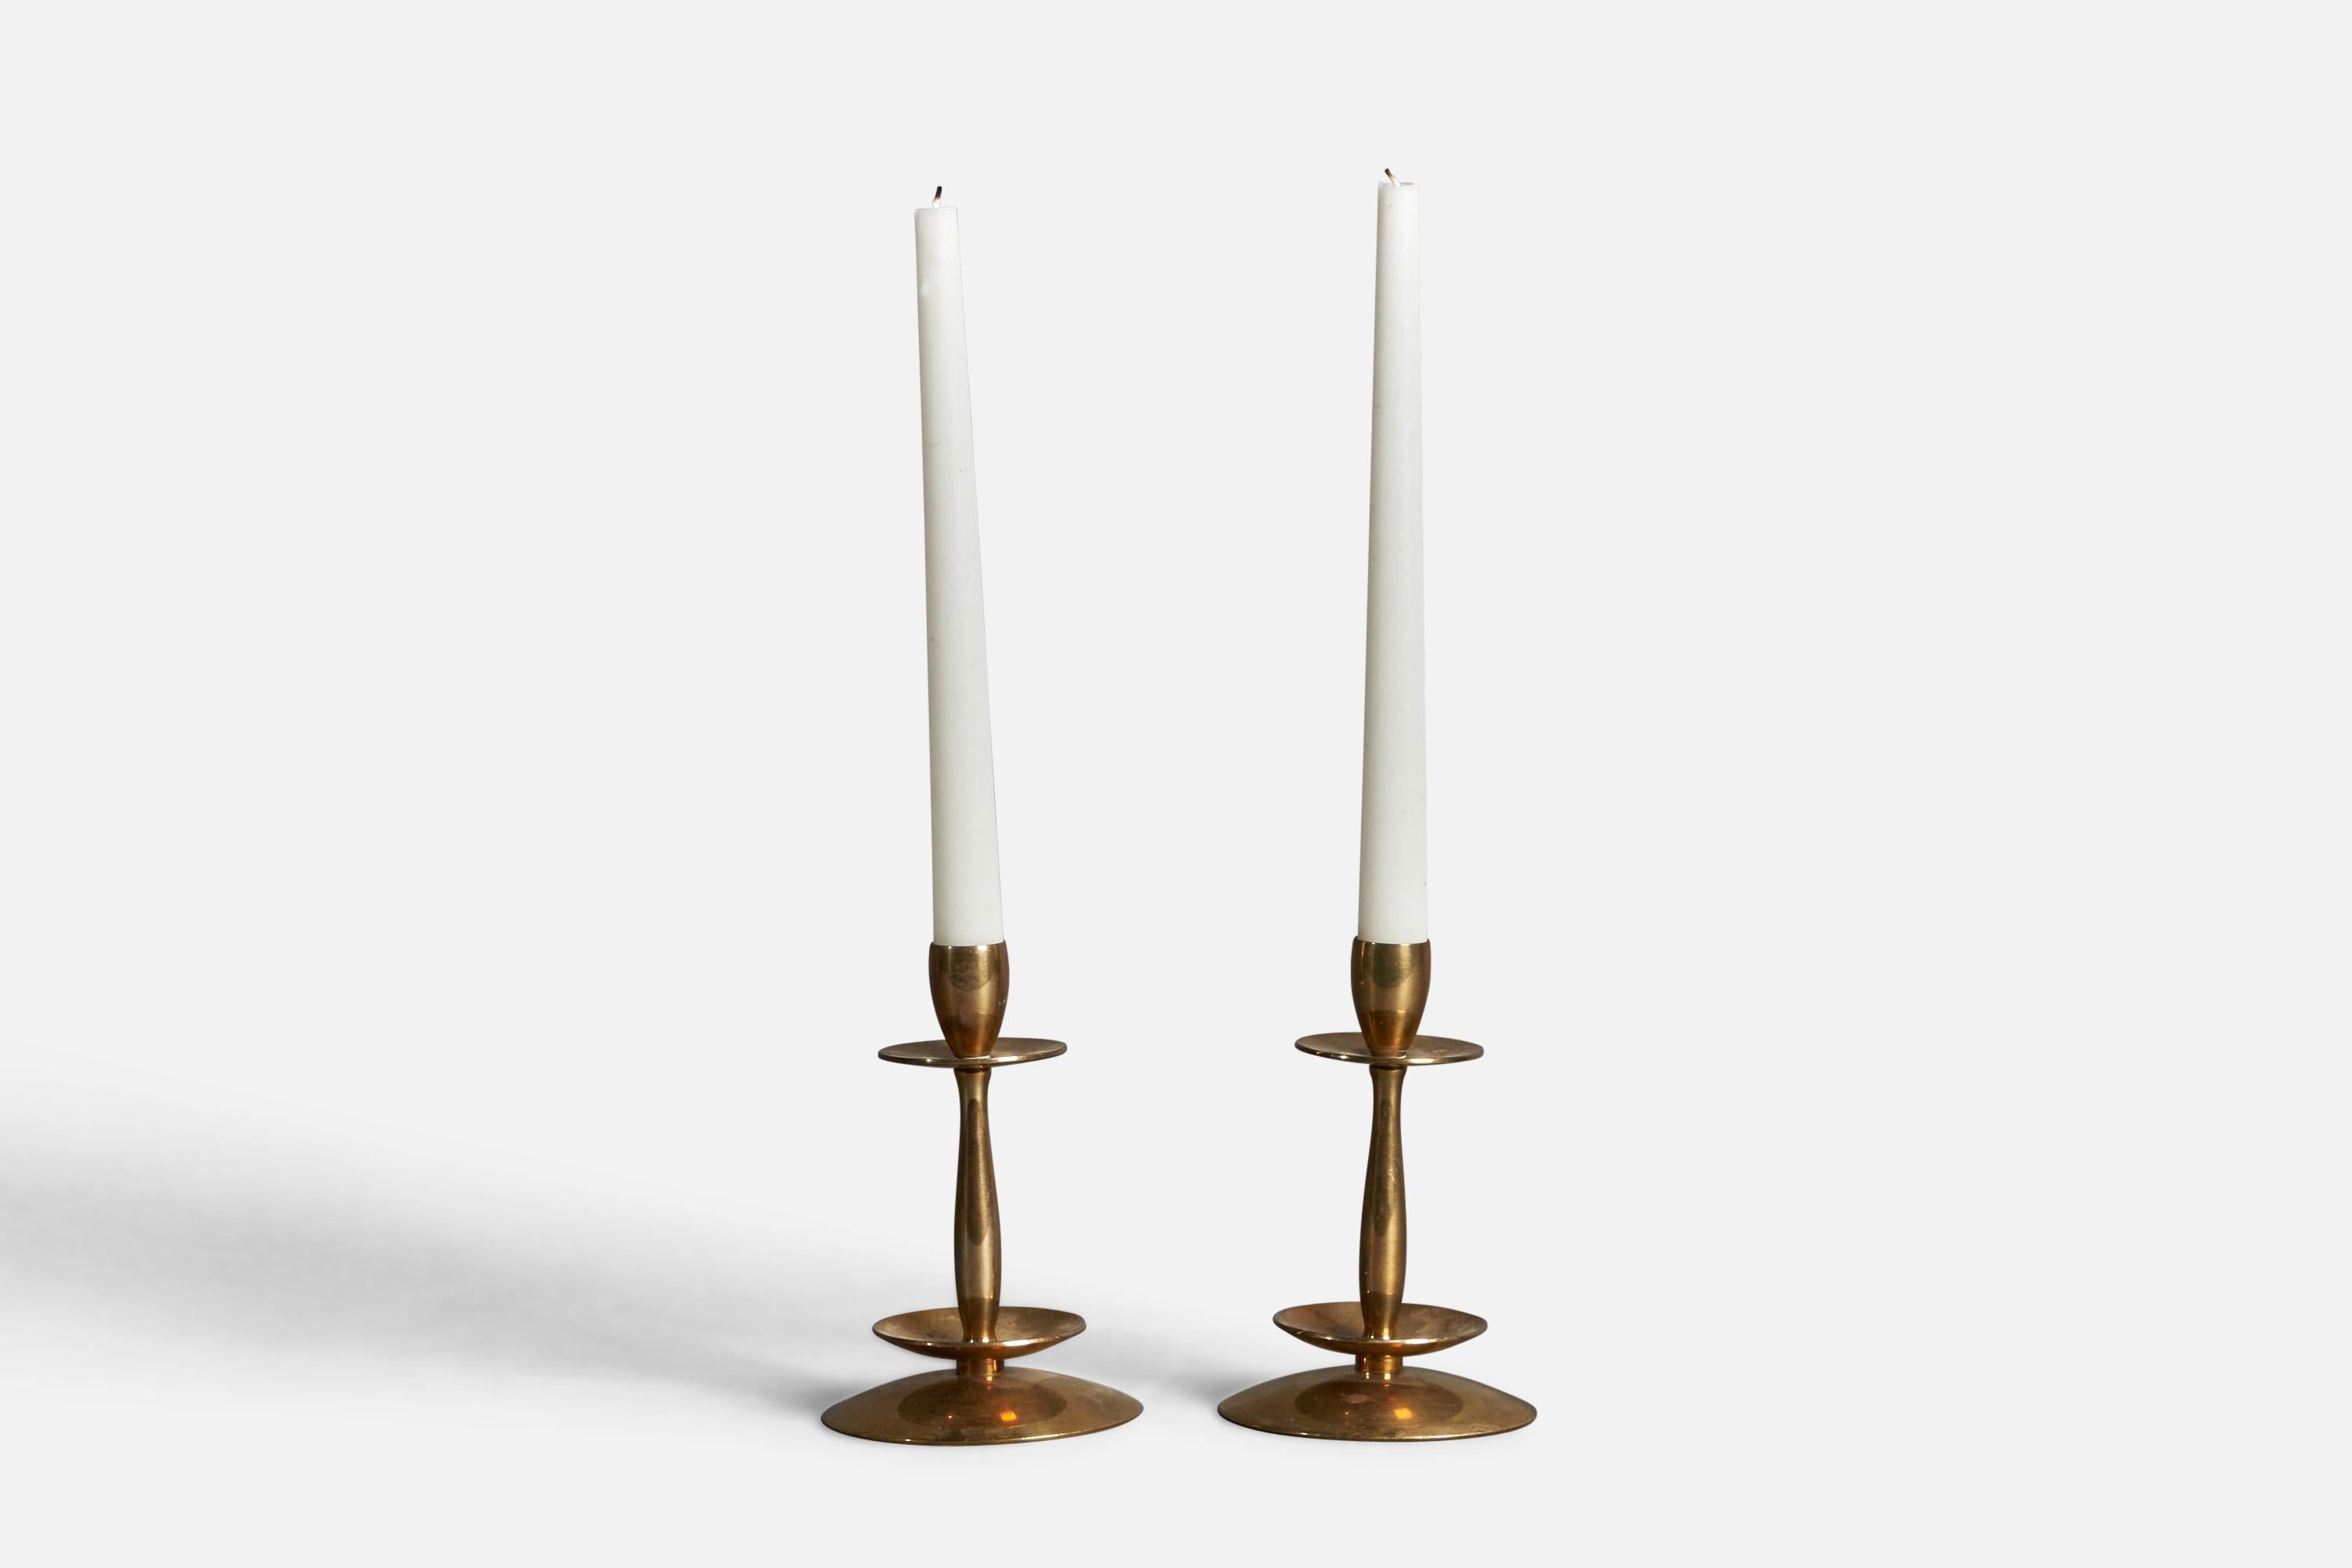 A pair of brass candlesticks designed and produced by Dantorp Design, Denmark, c. 1960s.